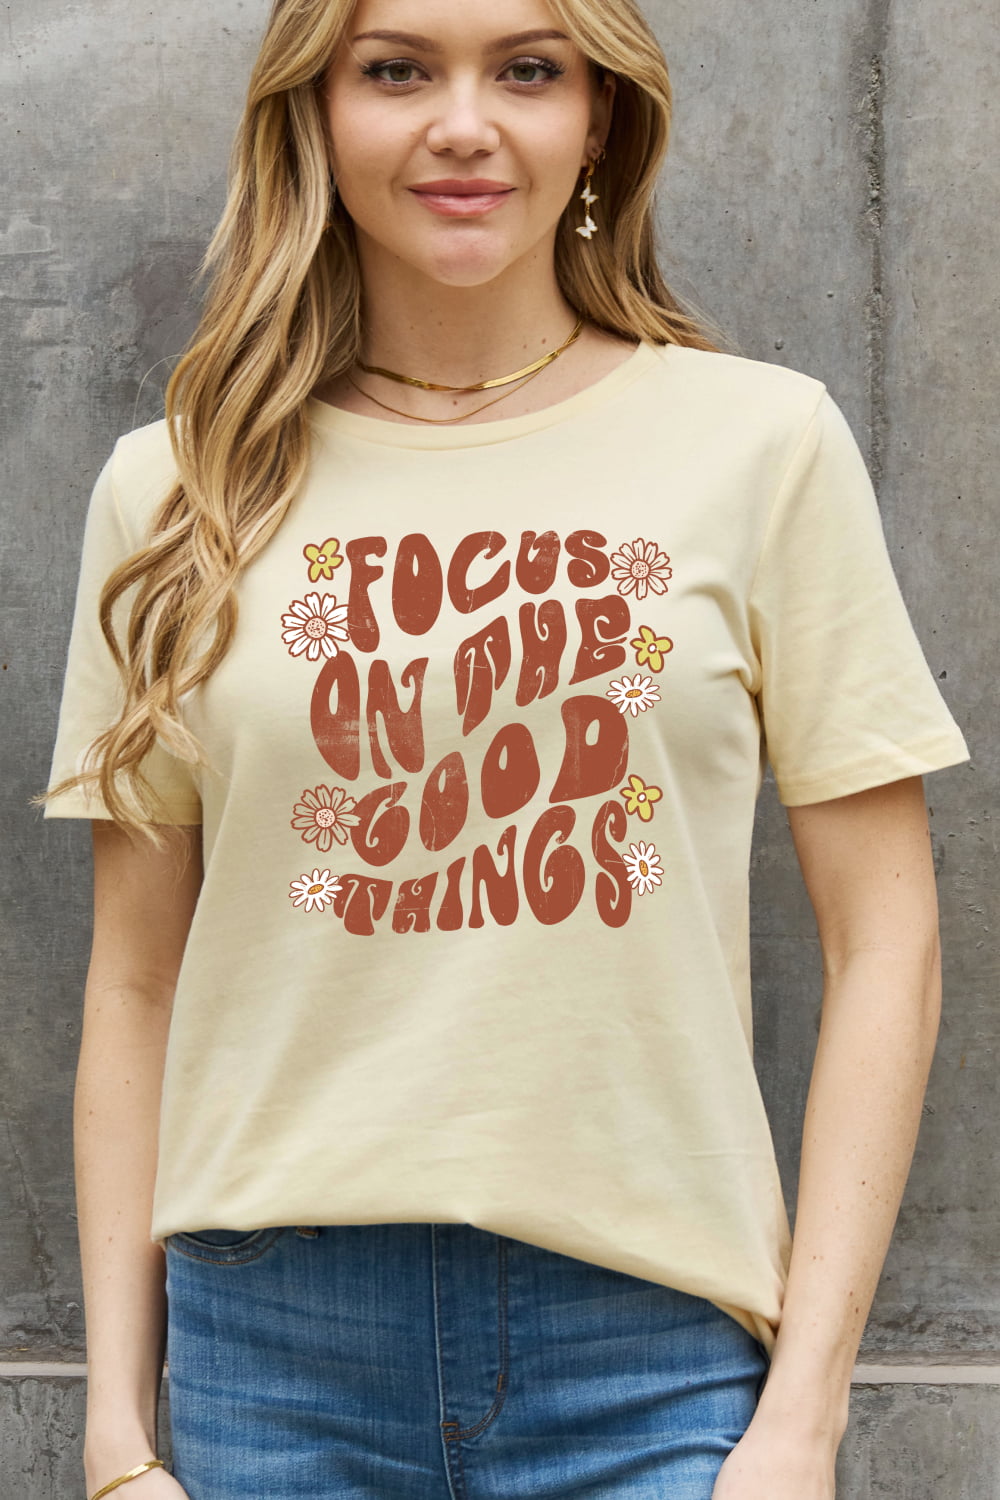 FOCUS ON THE GOOD THINGS Graphic Cotton Tee - T-Shirts - Shirts & Tops - 8 - 2024